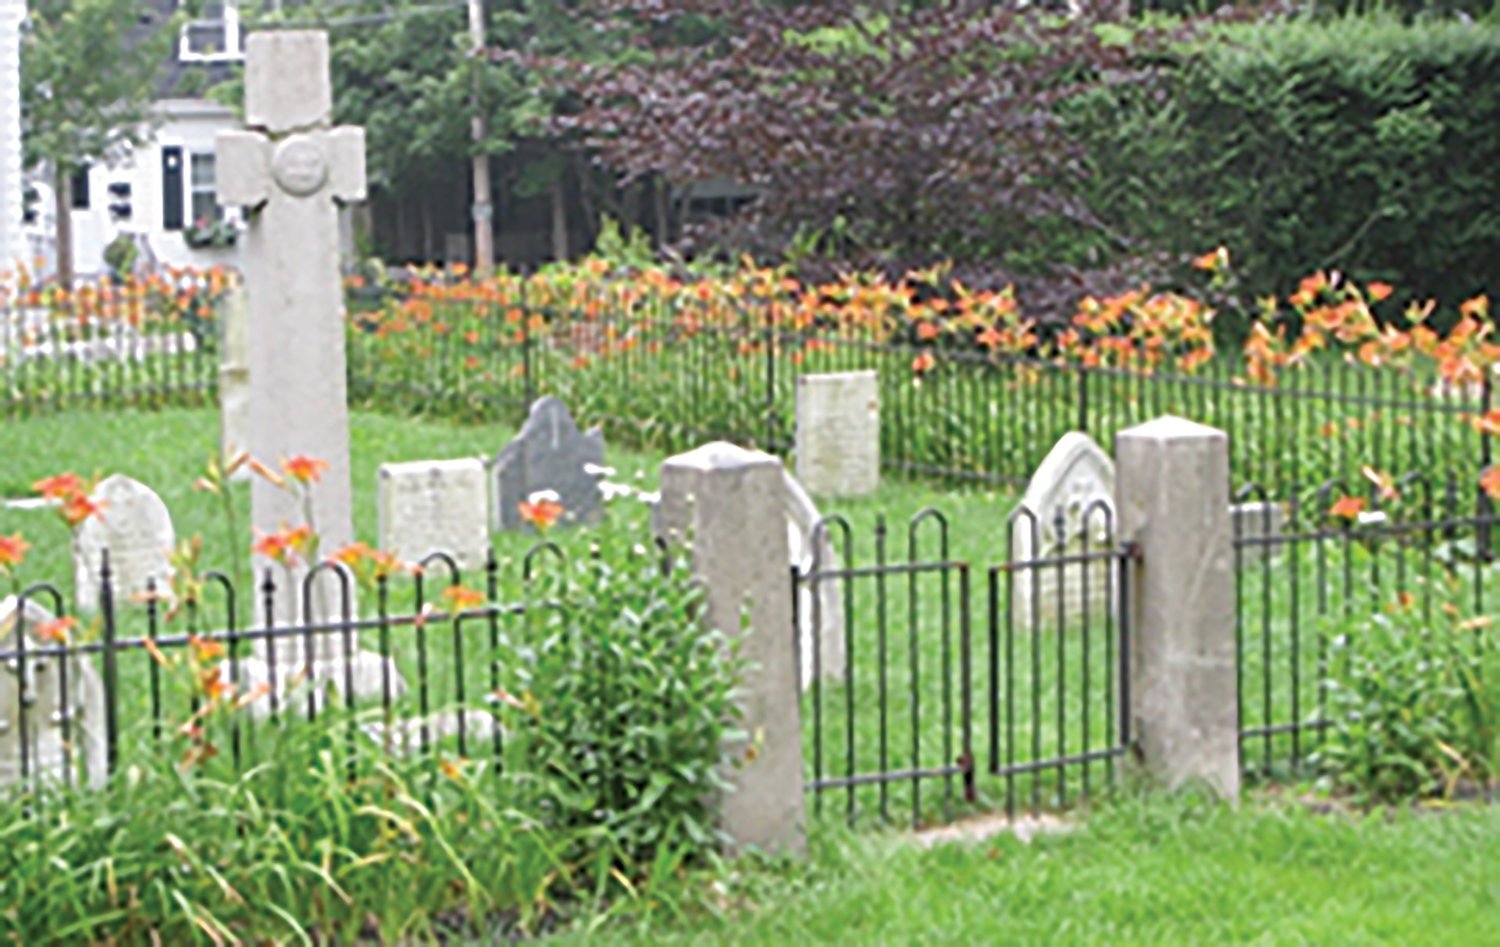 This park and cemetery on Barney Street in Newport holds a unique historical and spiritual significance for the Catholic faith community in Rhode Island.